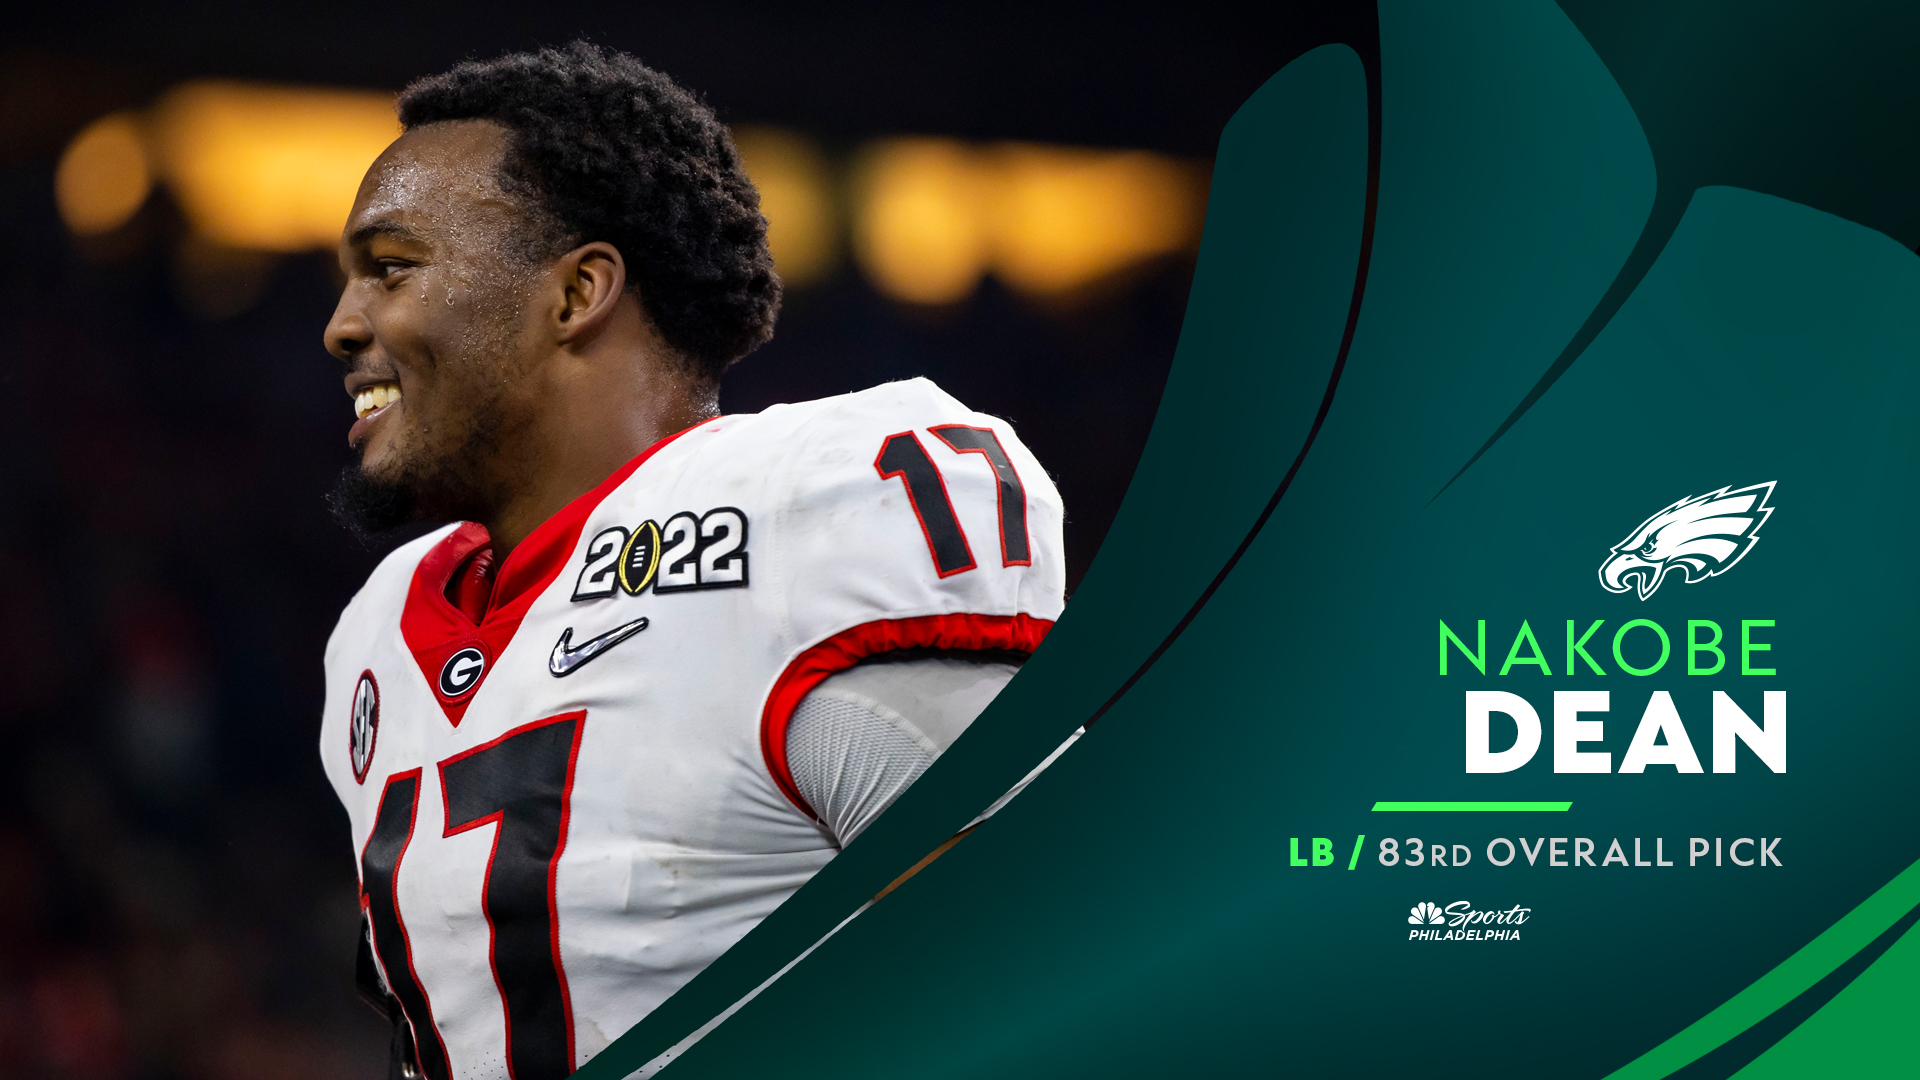 Eagles Draft Nakobe Dean with the 83rd Overall Pick